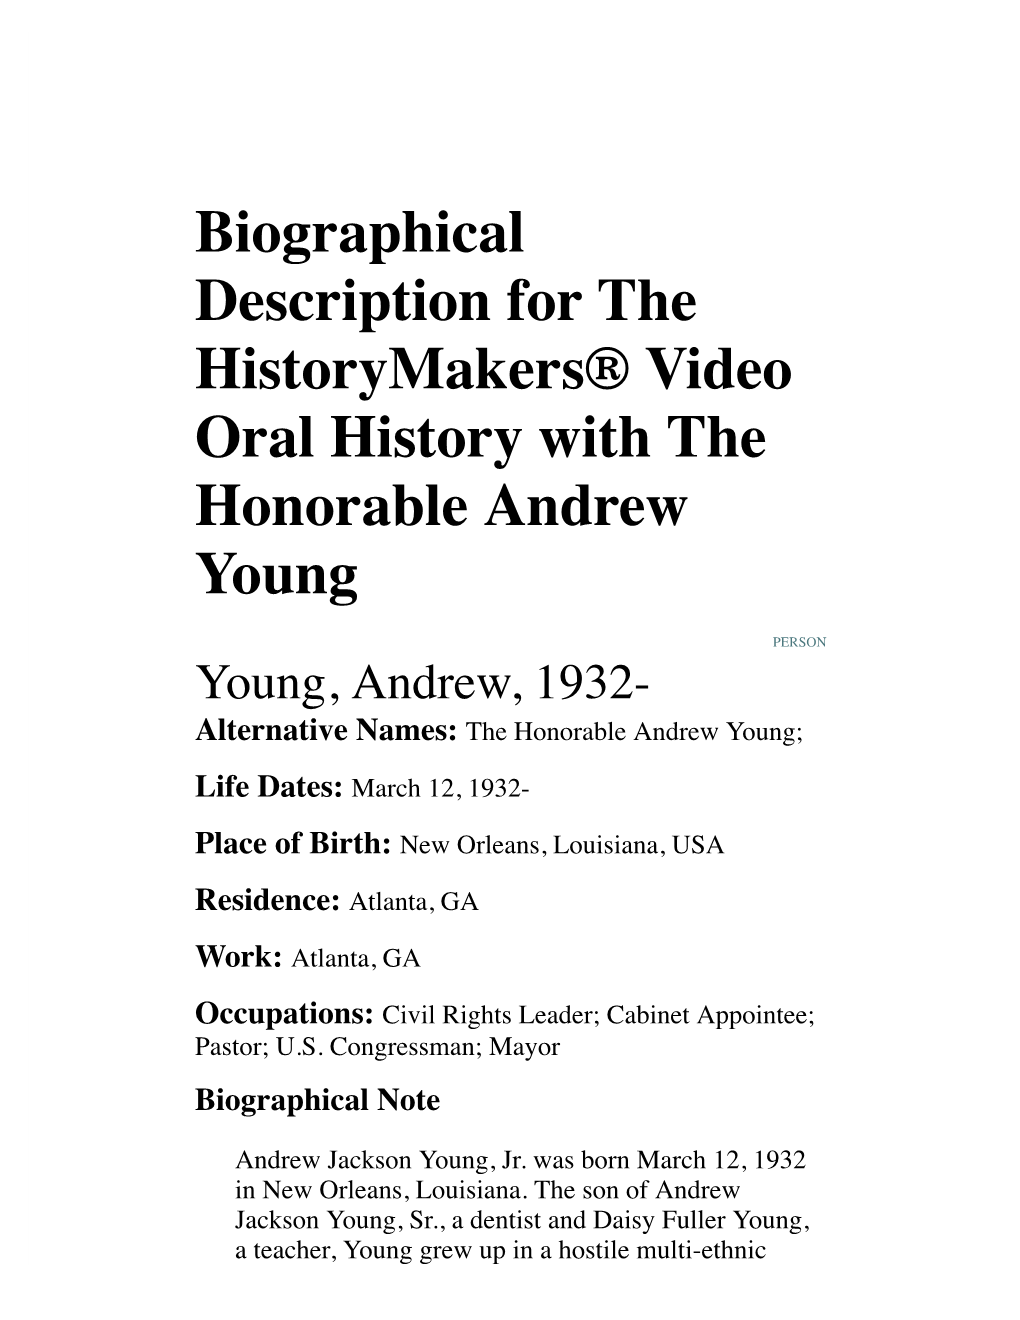 Biographical Description for the Historymakers® Video Oral History with the Honorable Andrew Young